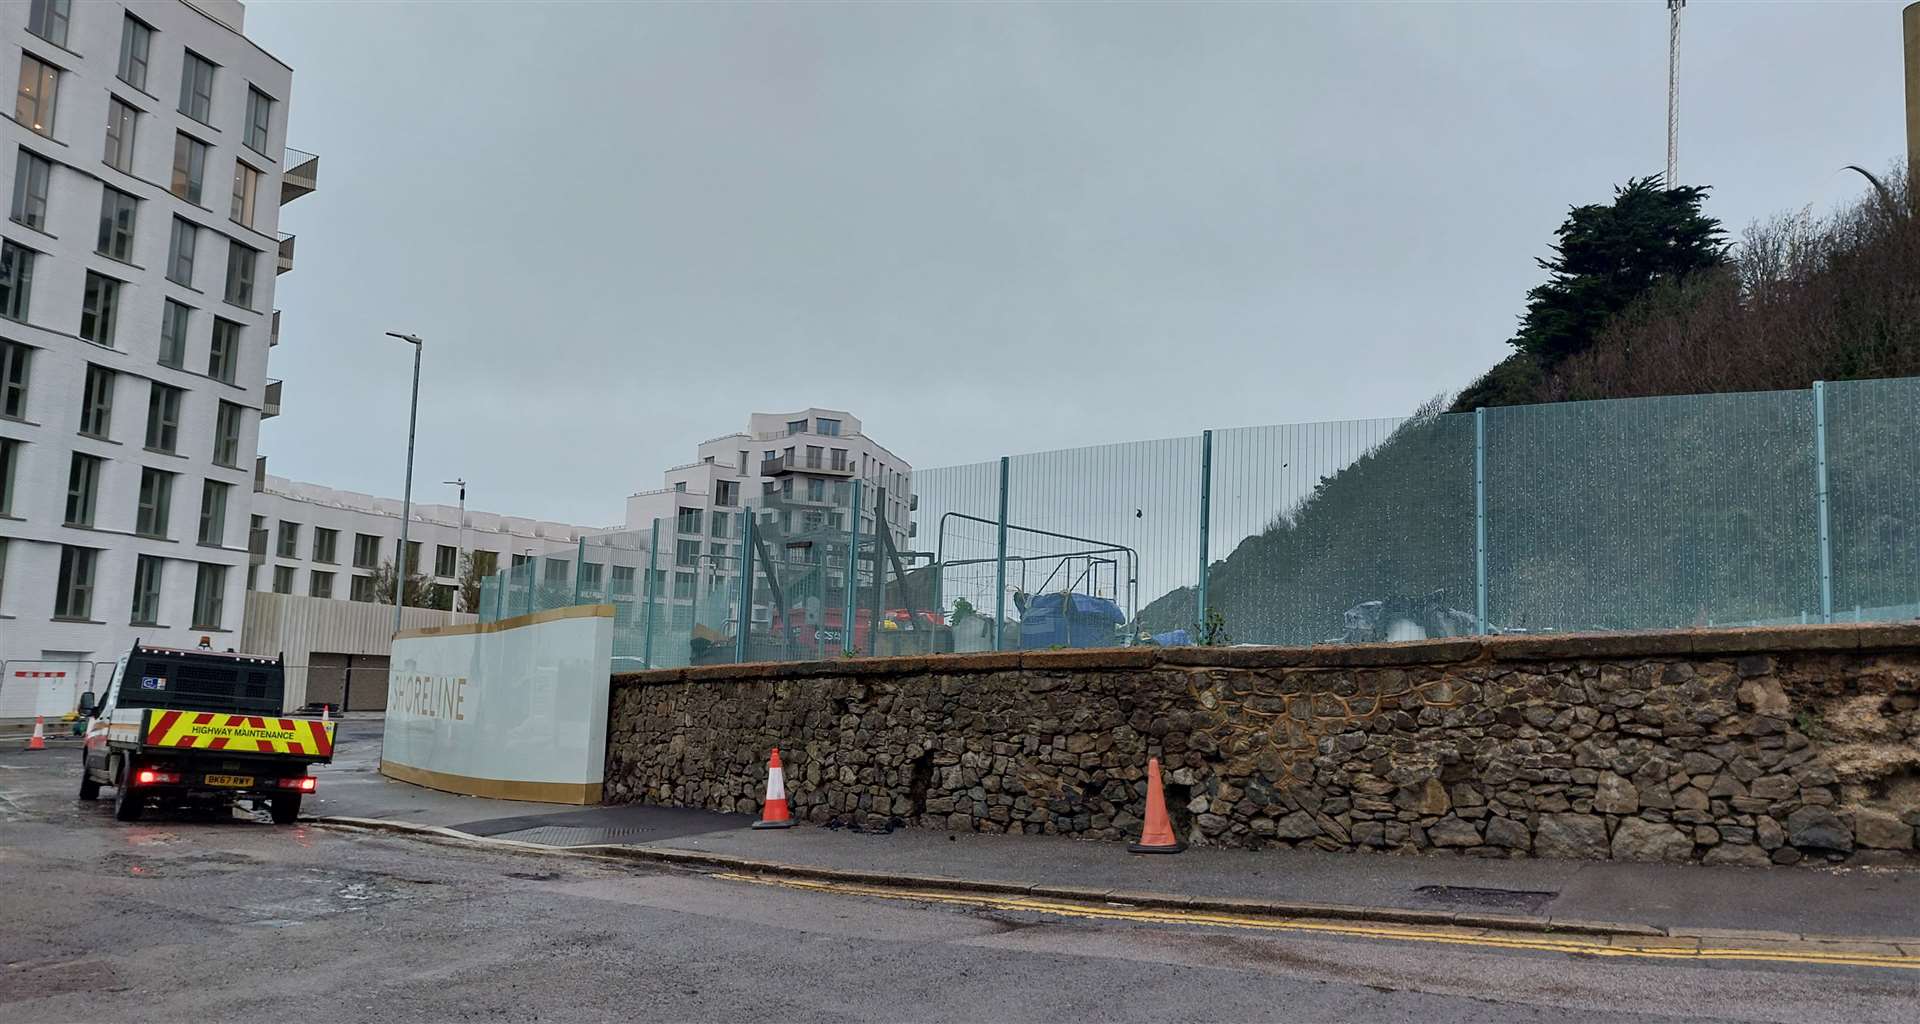 The car park wall is proposed to be “retained and restored” as part of the application